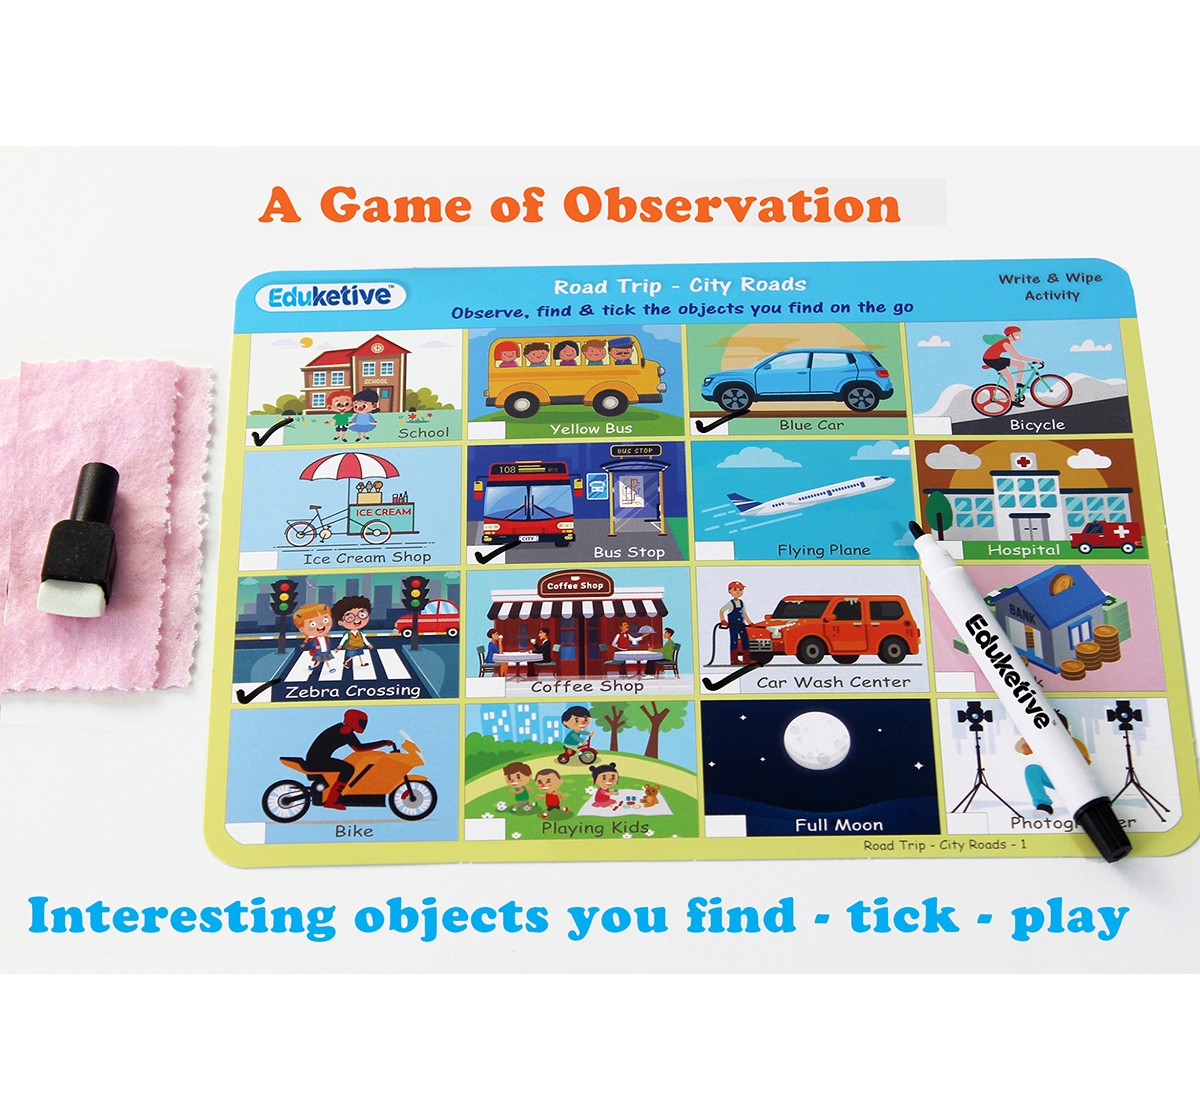 Eduketive Road Trip Write & Wipe Reusable Activity 3-9 Years Traveling Game Activitiy for Kids Observational Games with Marker - Gift for Kids